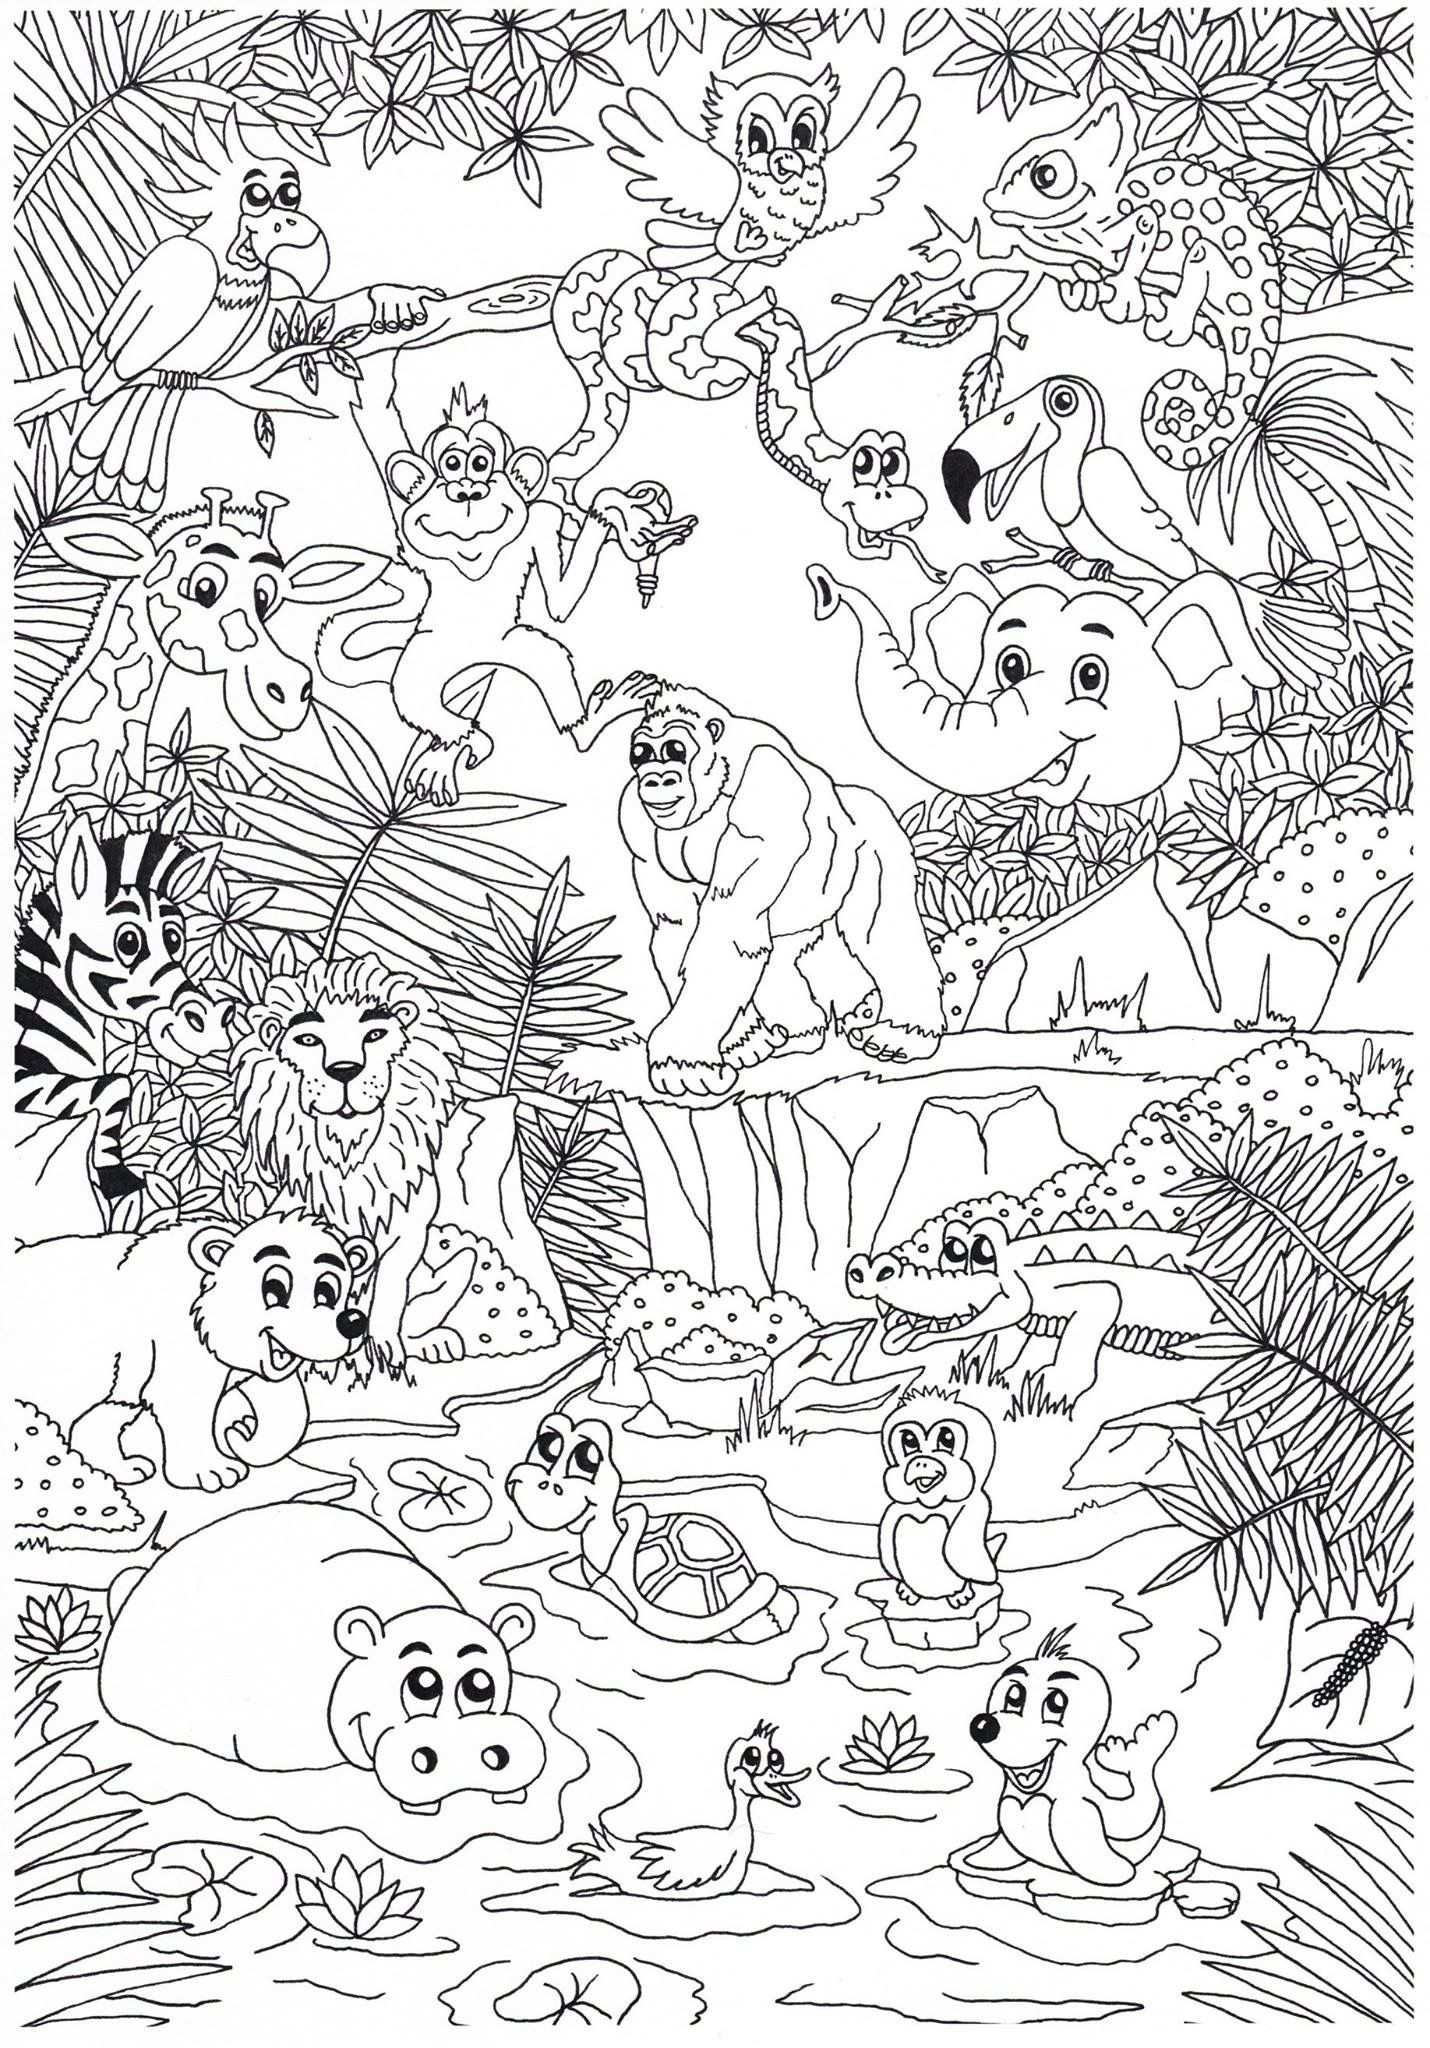 Coloring Page With Images Zoo Coloring Pages Jungle Coloring